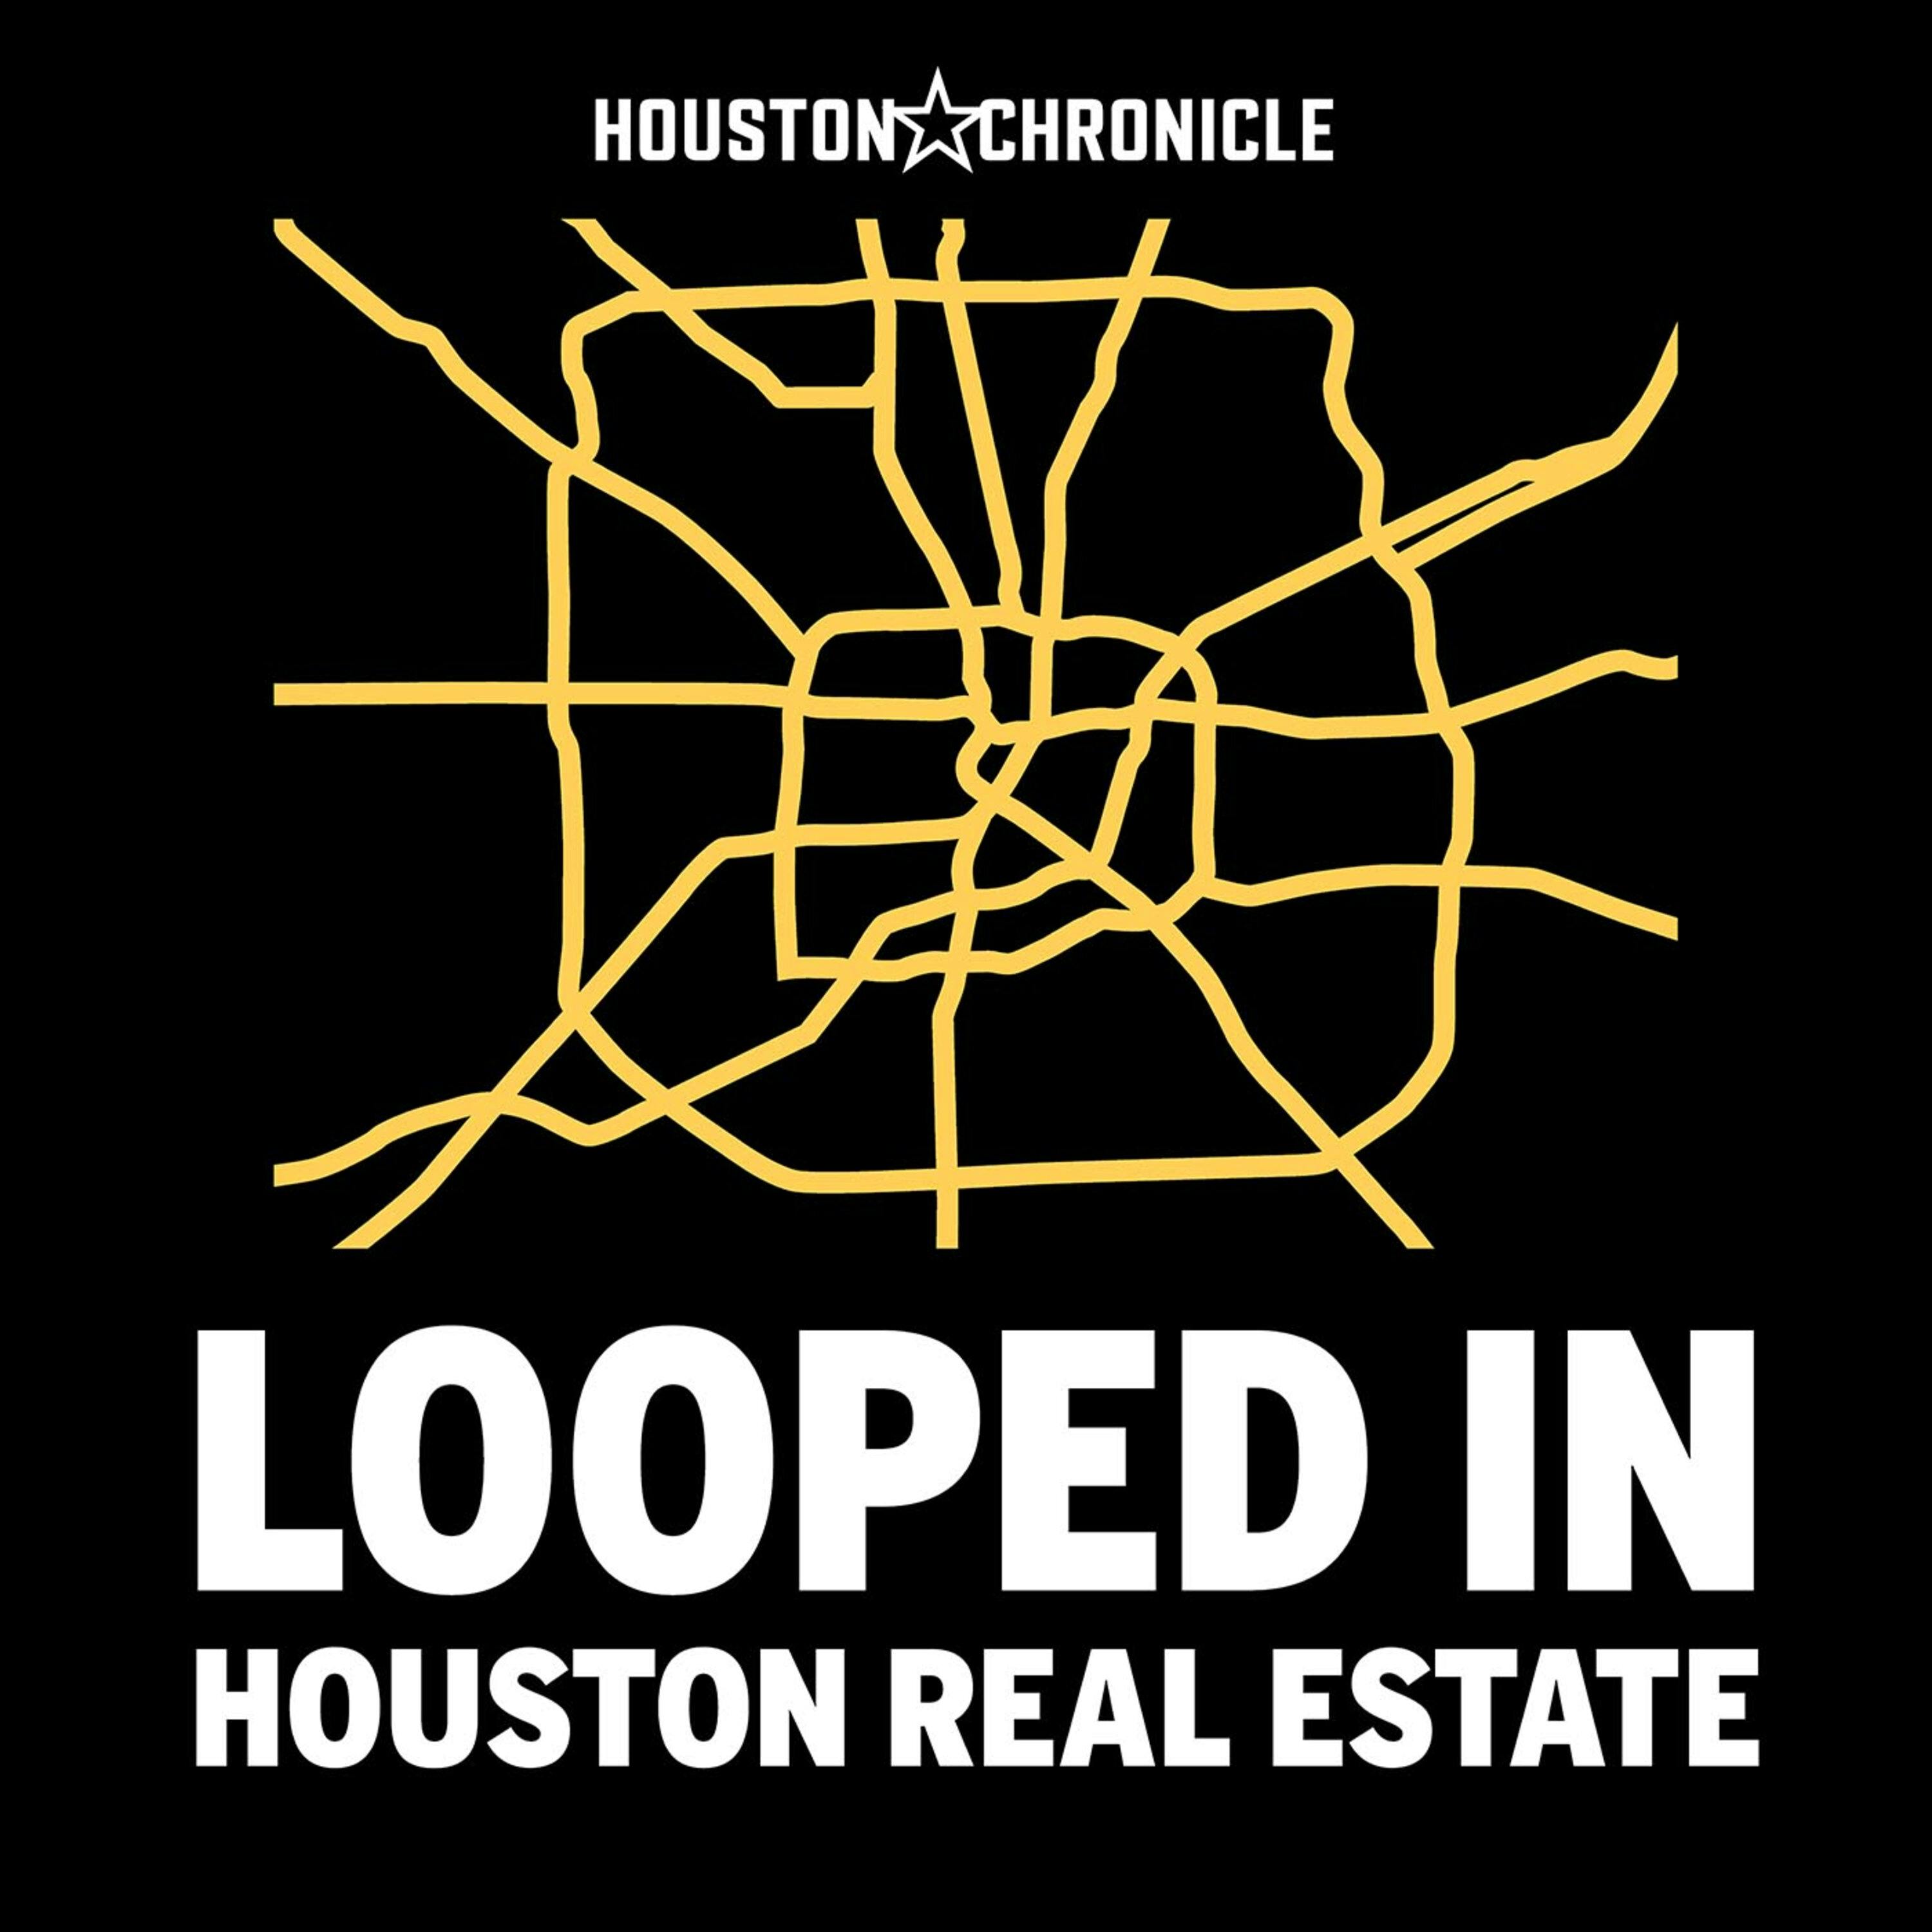 Houston’s biggest eviction prevention effort is ending. What lessons can we learn?